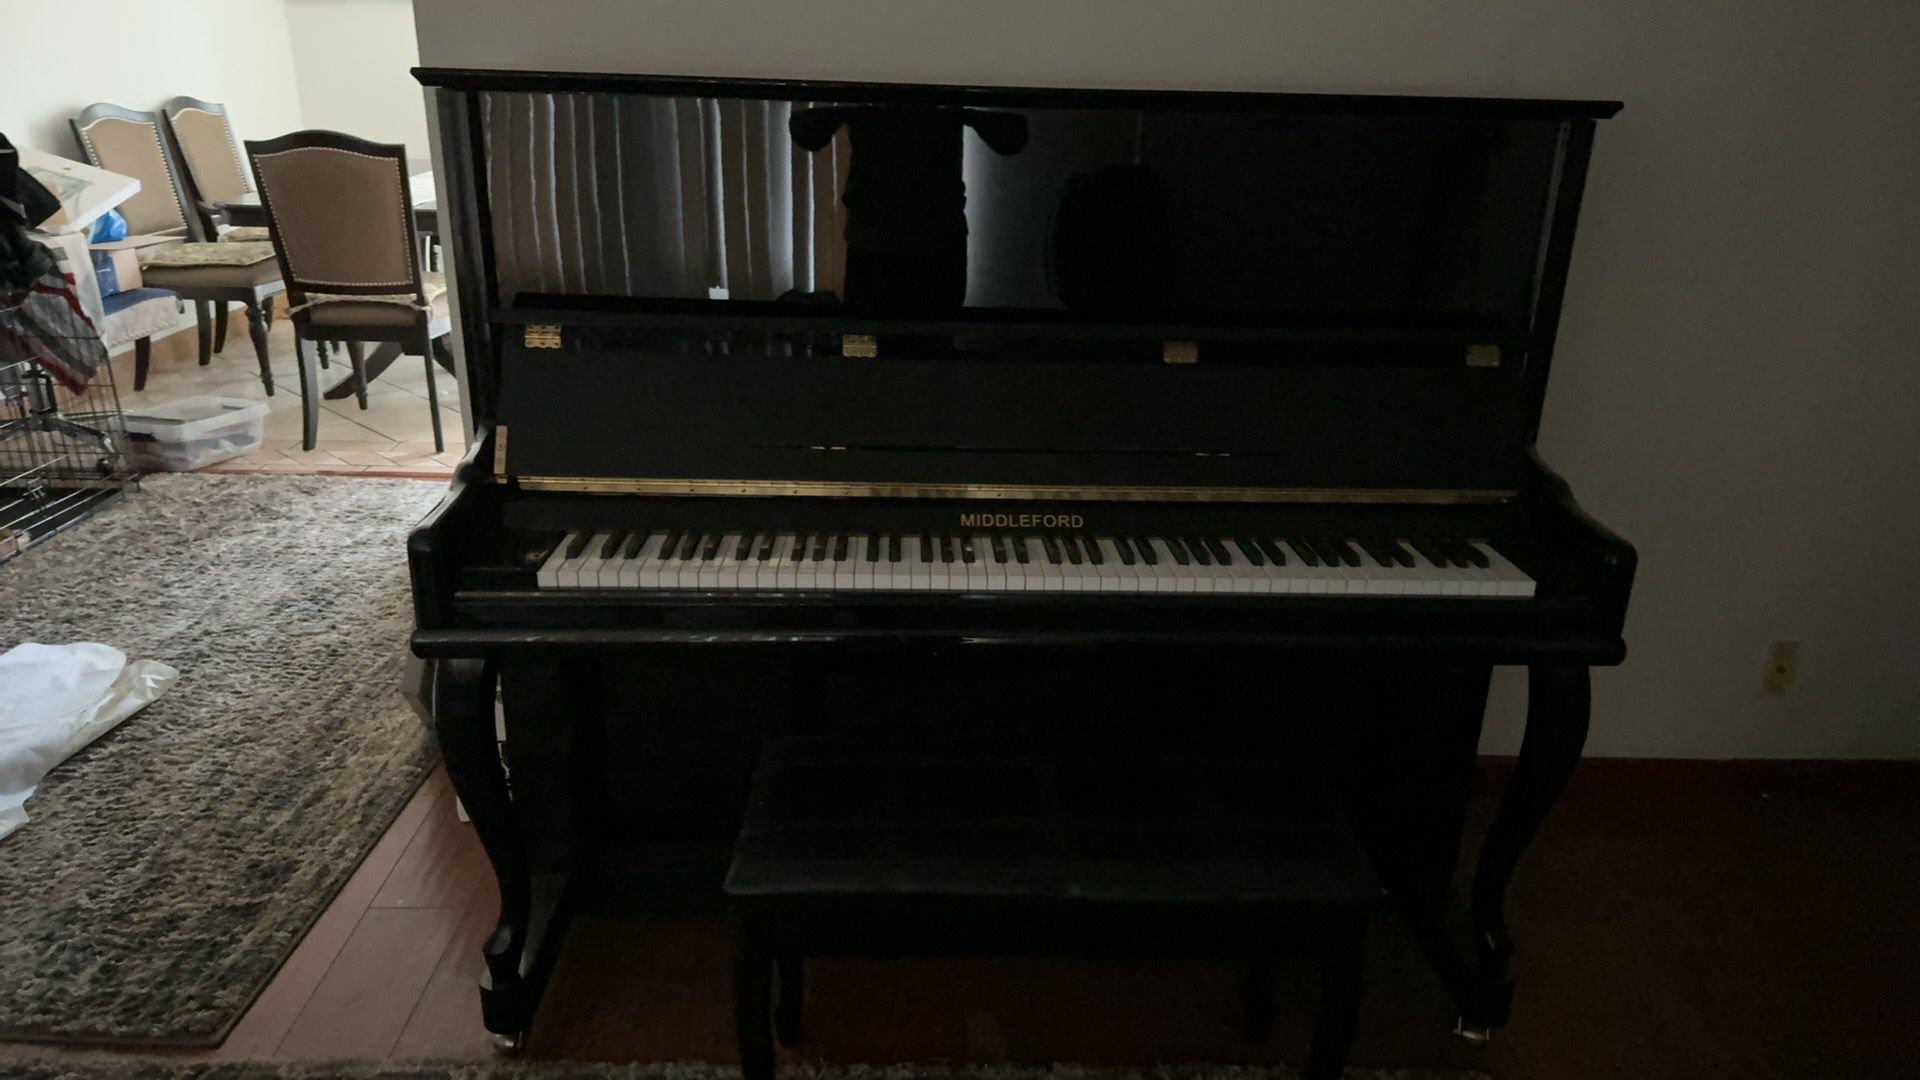 Middleford Piano